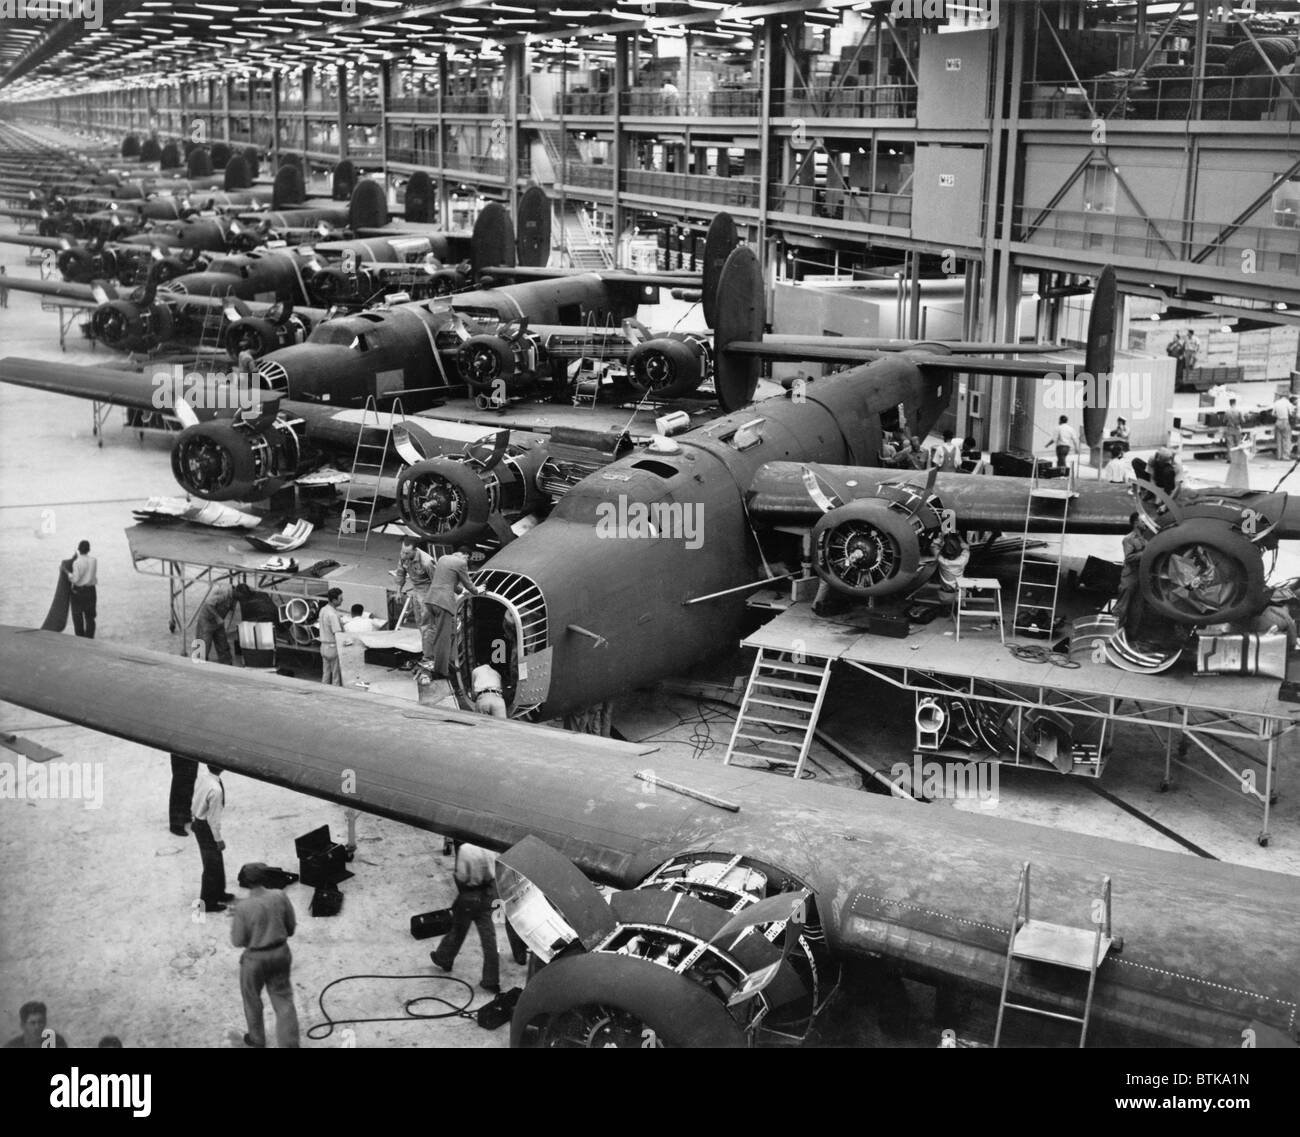 B-24 Liberator bombers nearing completion on the assembly line at the Consolidated Aircraft Corporation plant, Fort Worth, Texas. 1942. Stock Photo